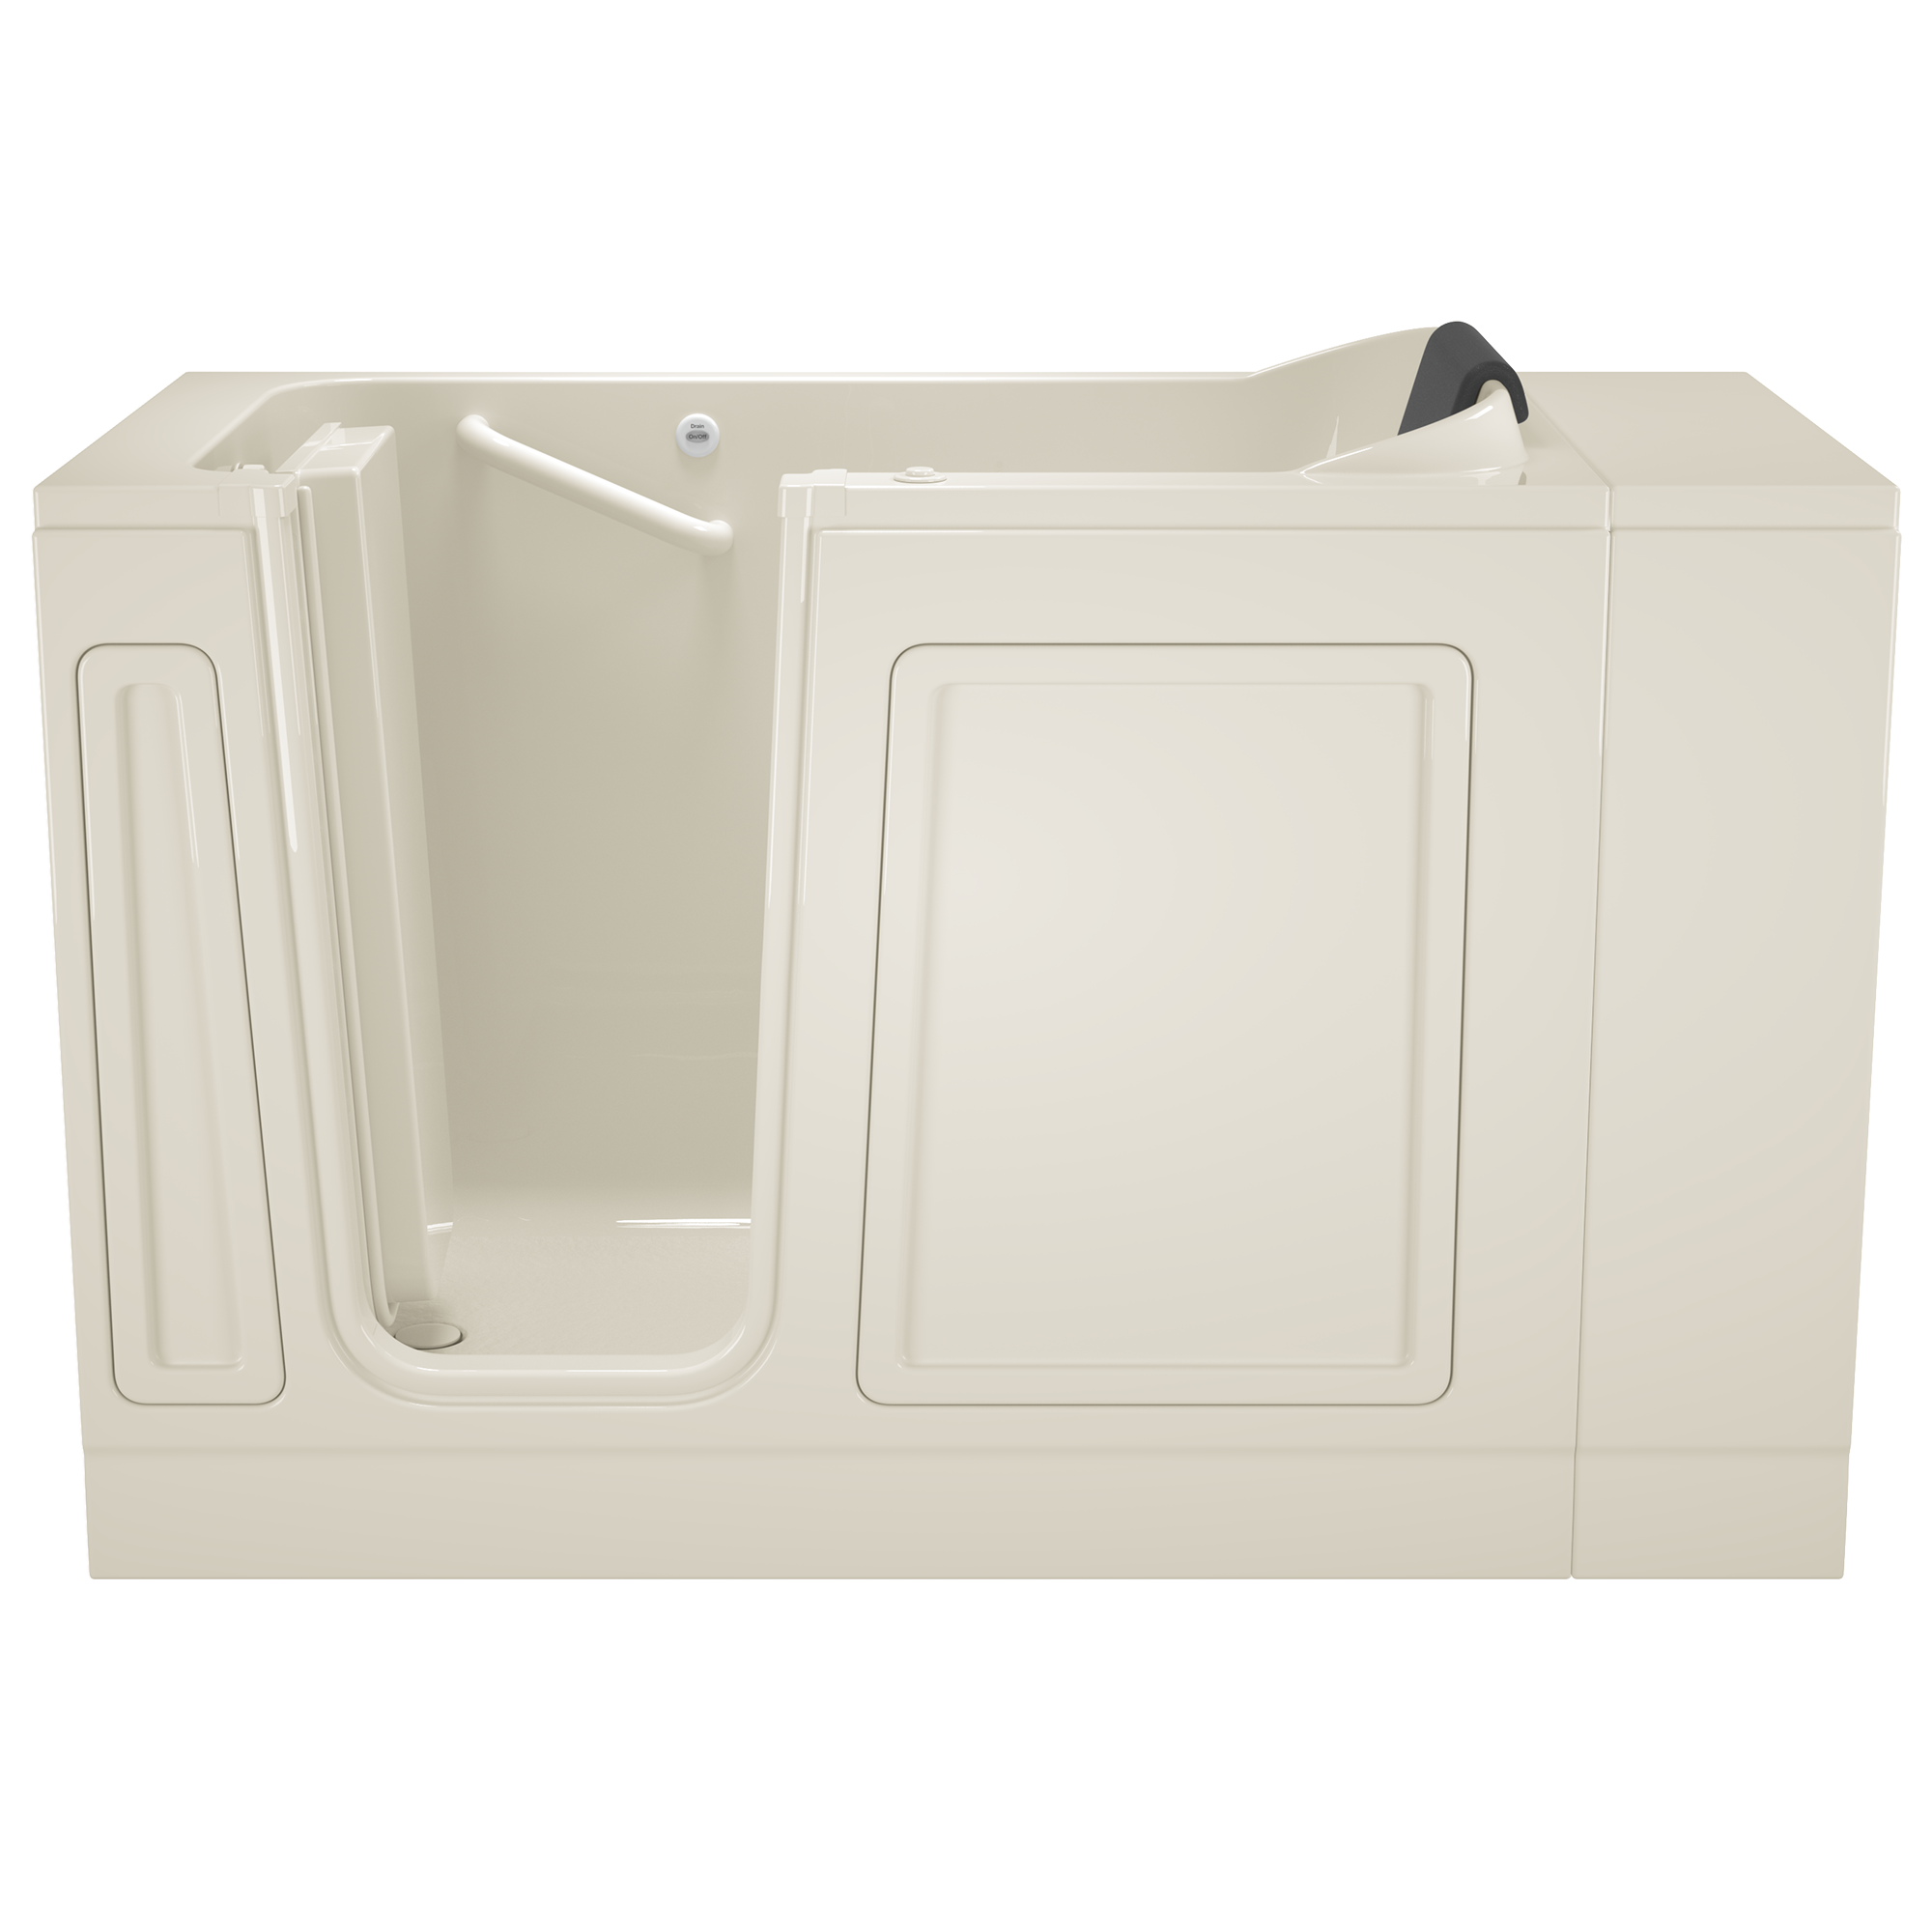 Acrylic Luxury Series 28 x 48-Inch Walk-in Tub With Whirlpool System - Left-Hand Drain